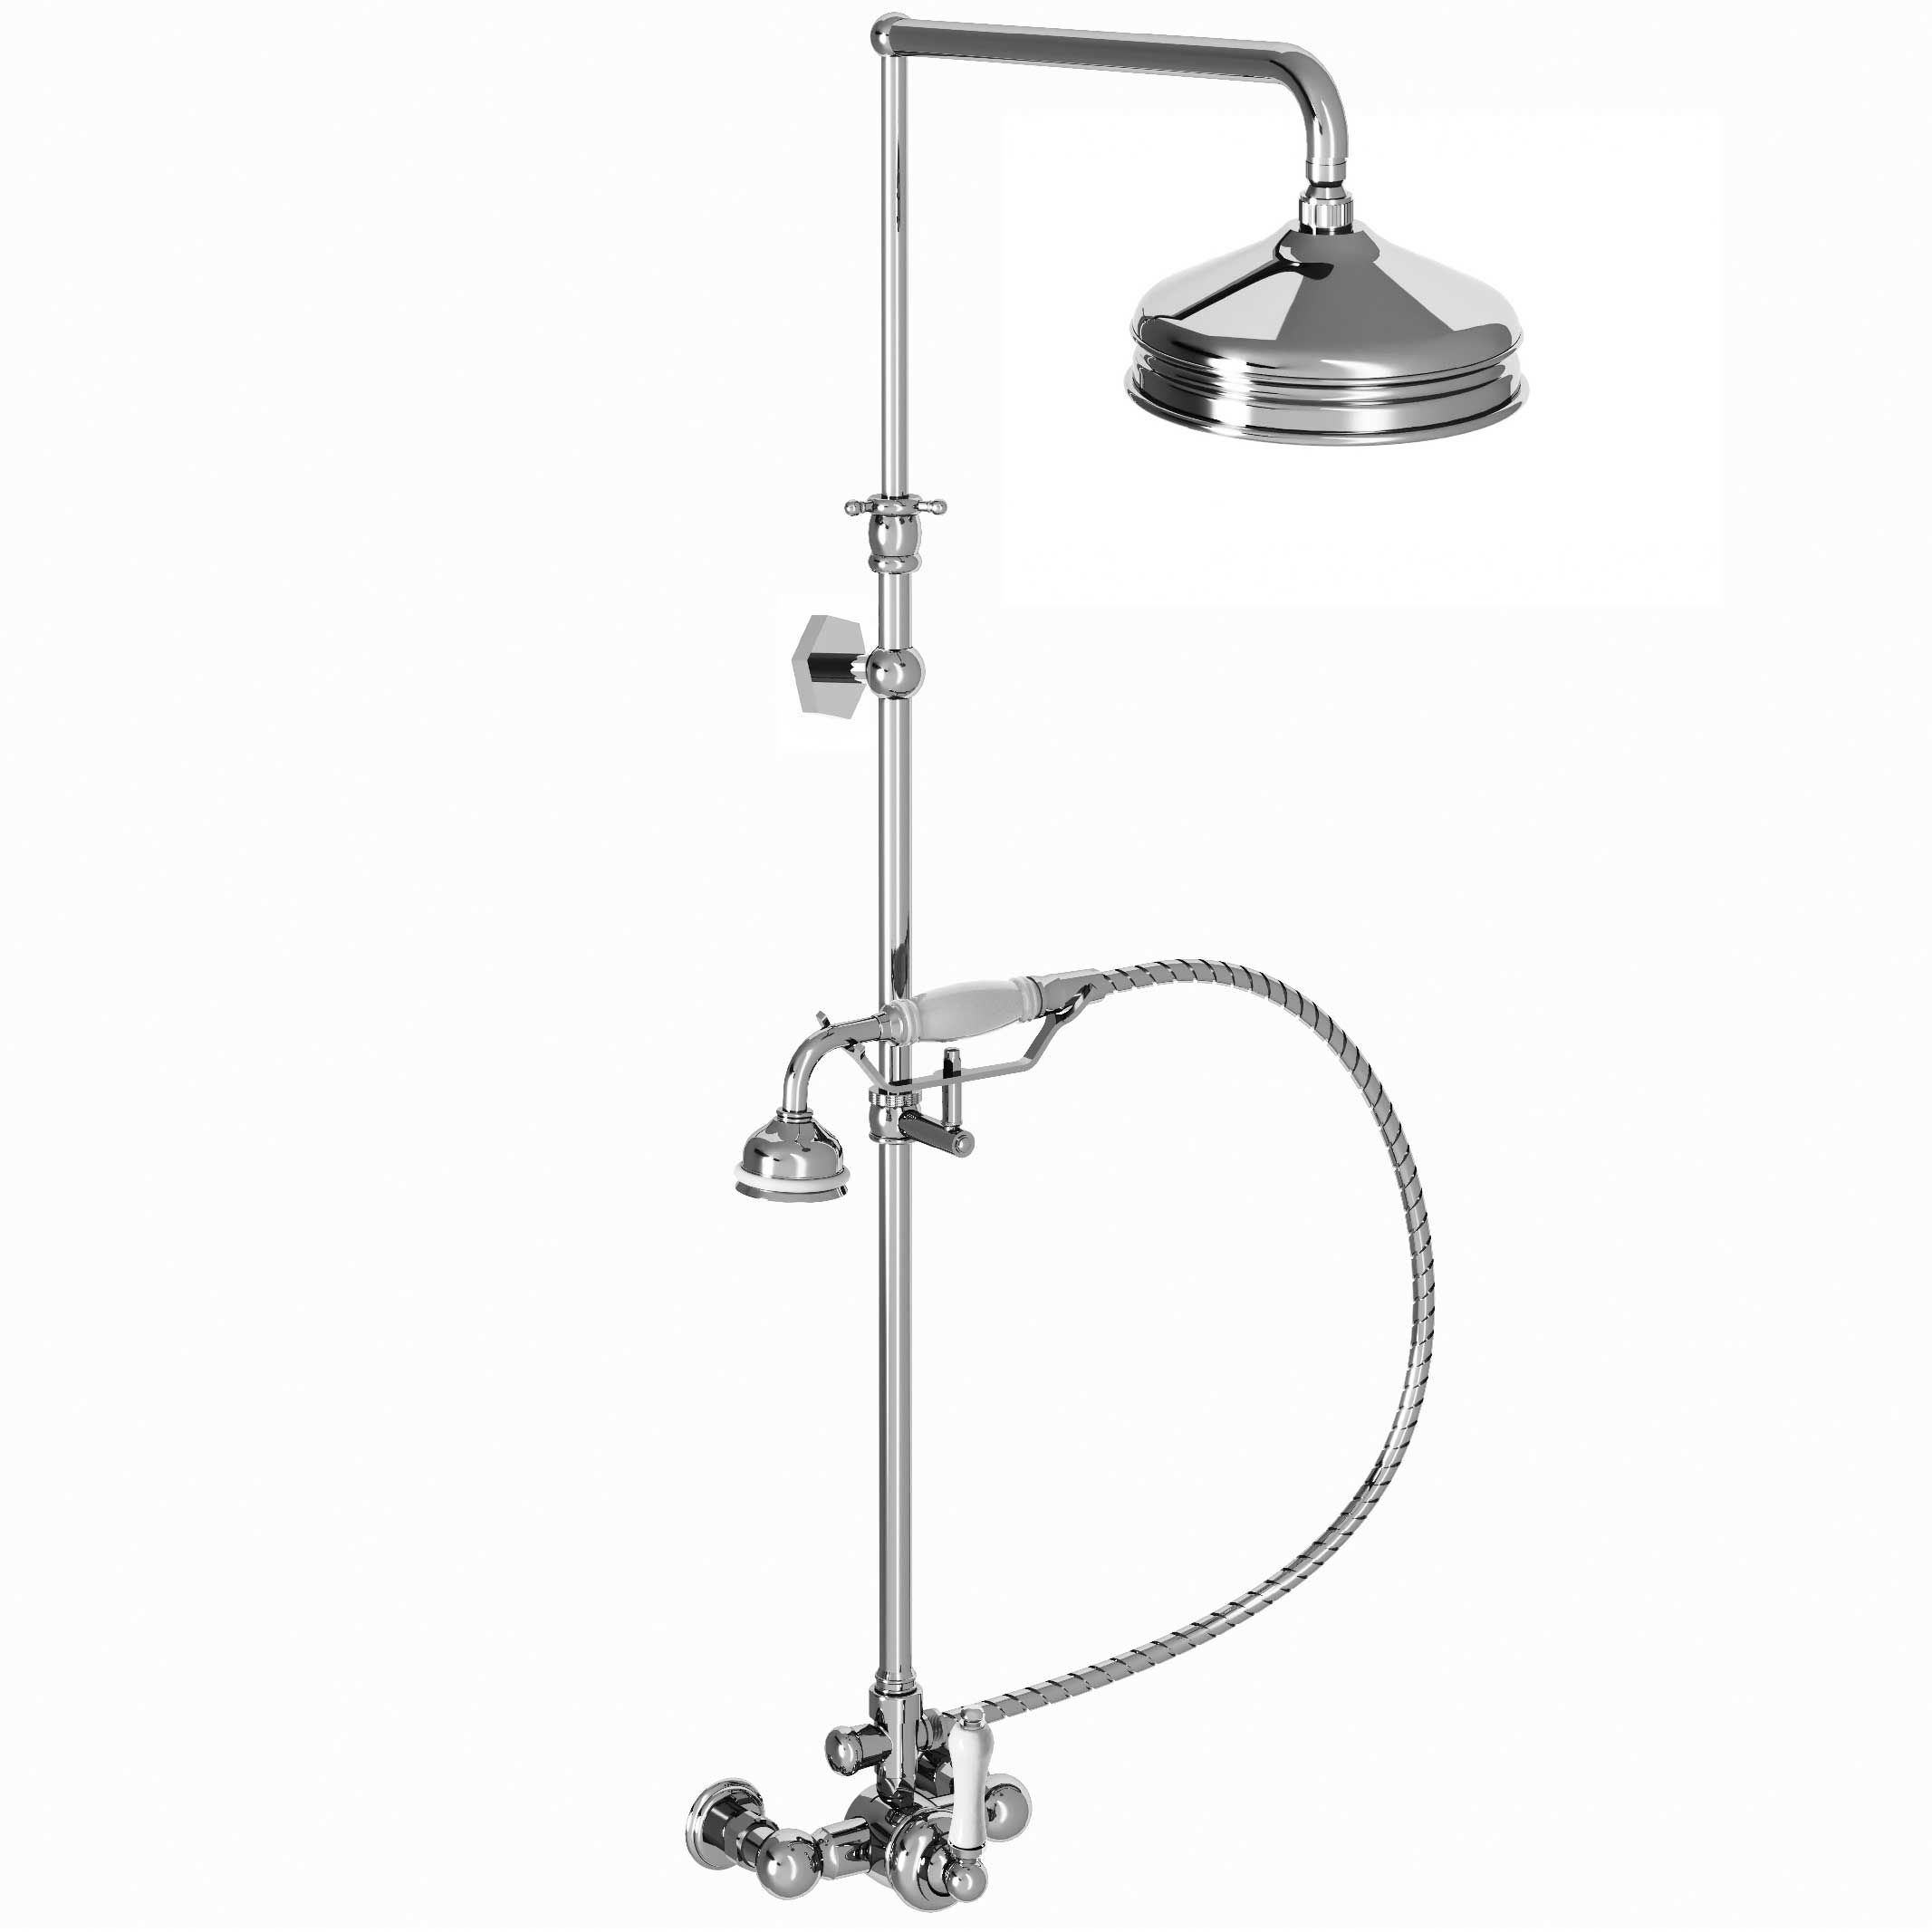 M32-2204M Single-lever shower mixer with column, anti-scaling